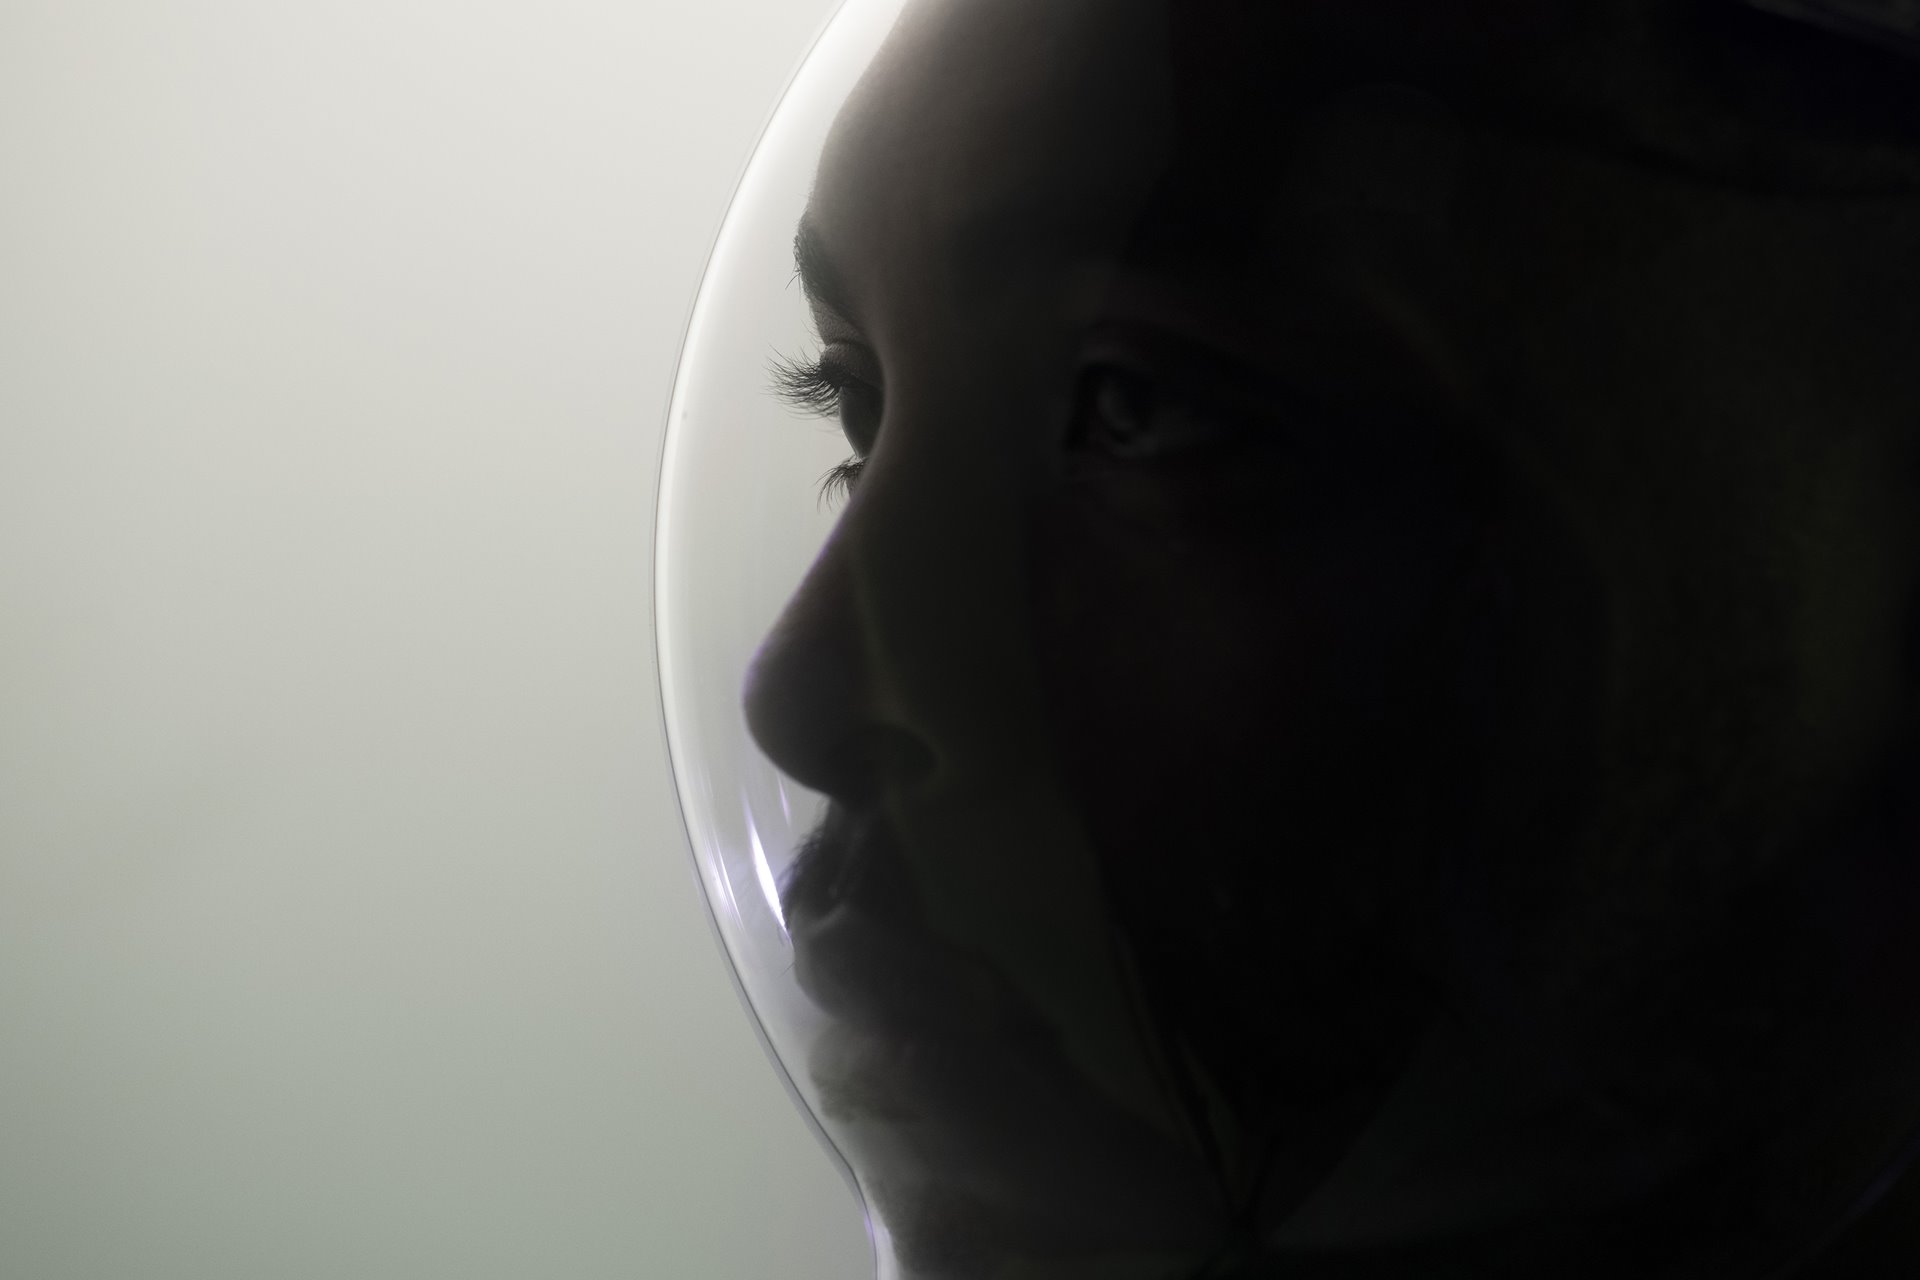 Isaac Charles Anderson, represented here as an fictional astronaut from the Gay Space Agency, during &lsquo;space suit tests&rsquo; in Brooklyn, New York, United States. Anderson is a real-life LGBTQI+ aspiring astronaut.